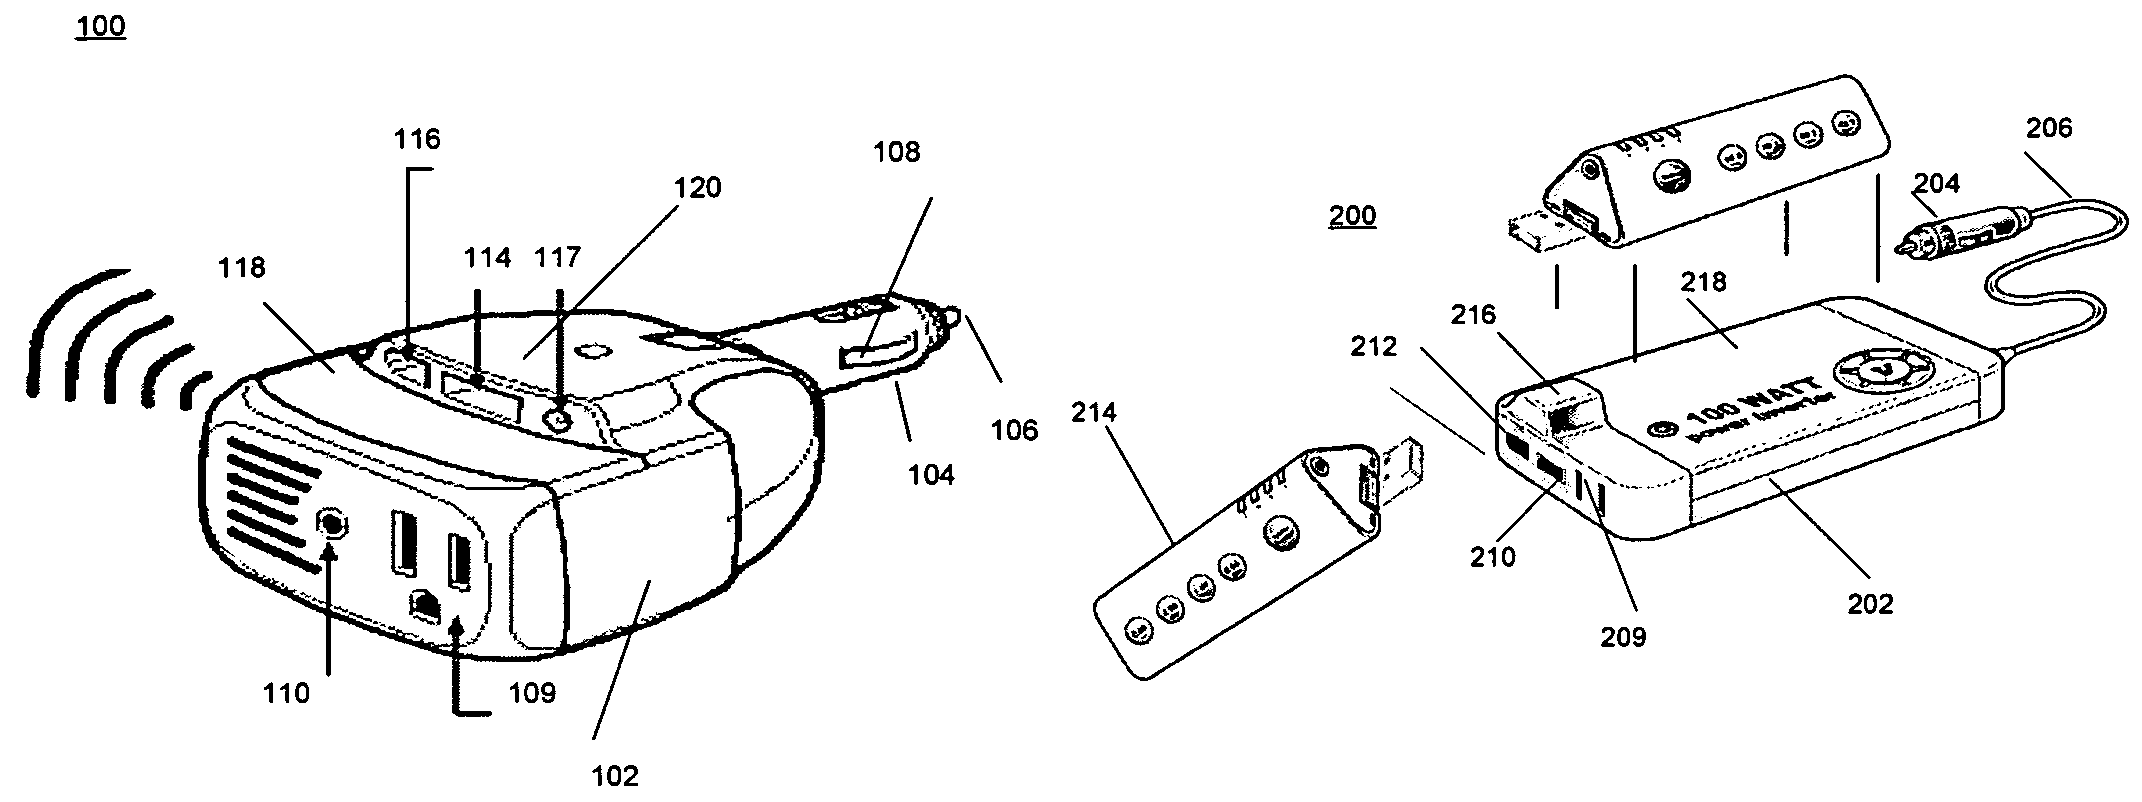 Cigarette lighter adapter device that interfaces with an external device via a port interface